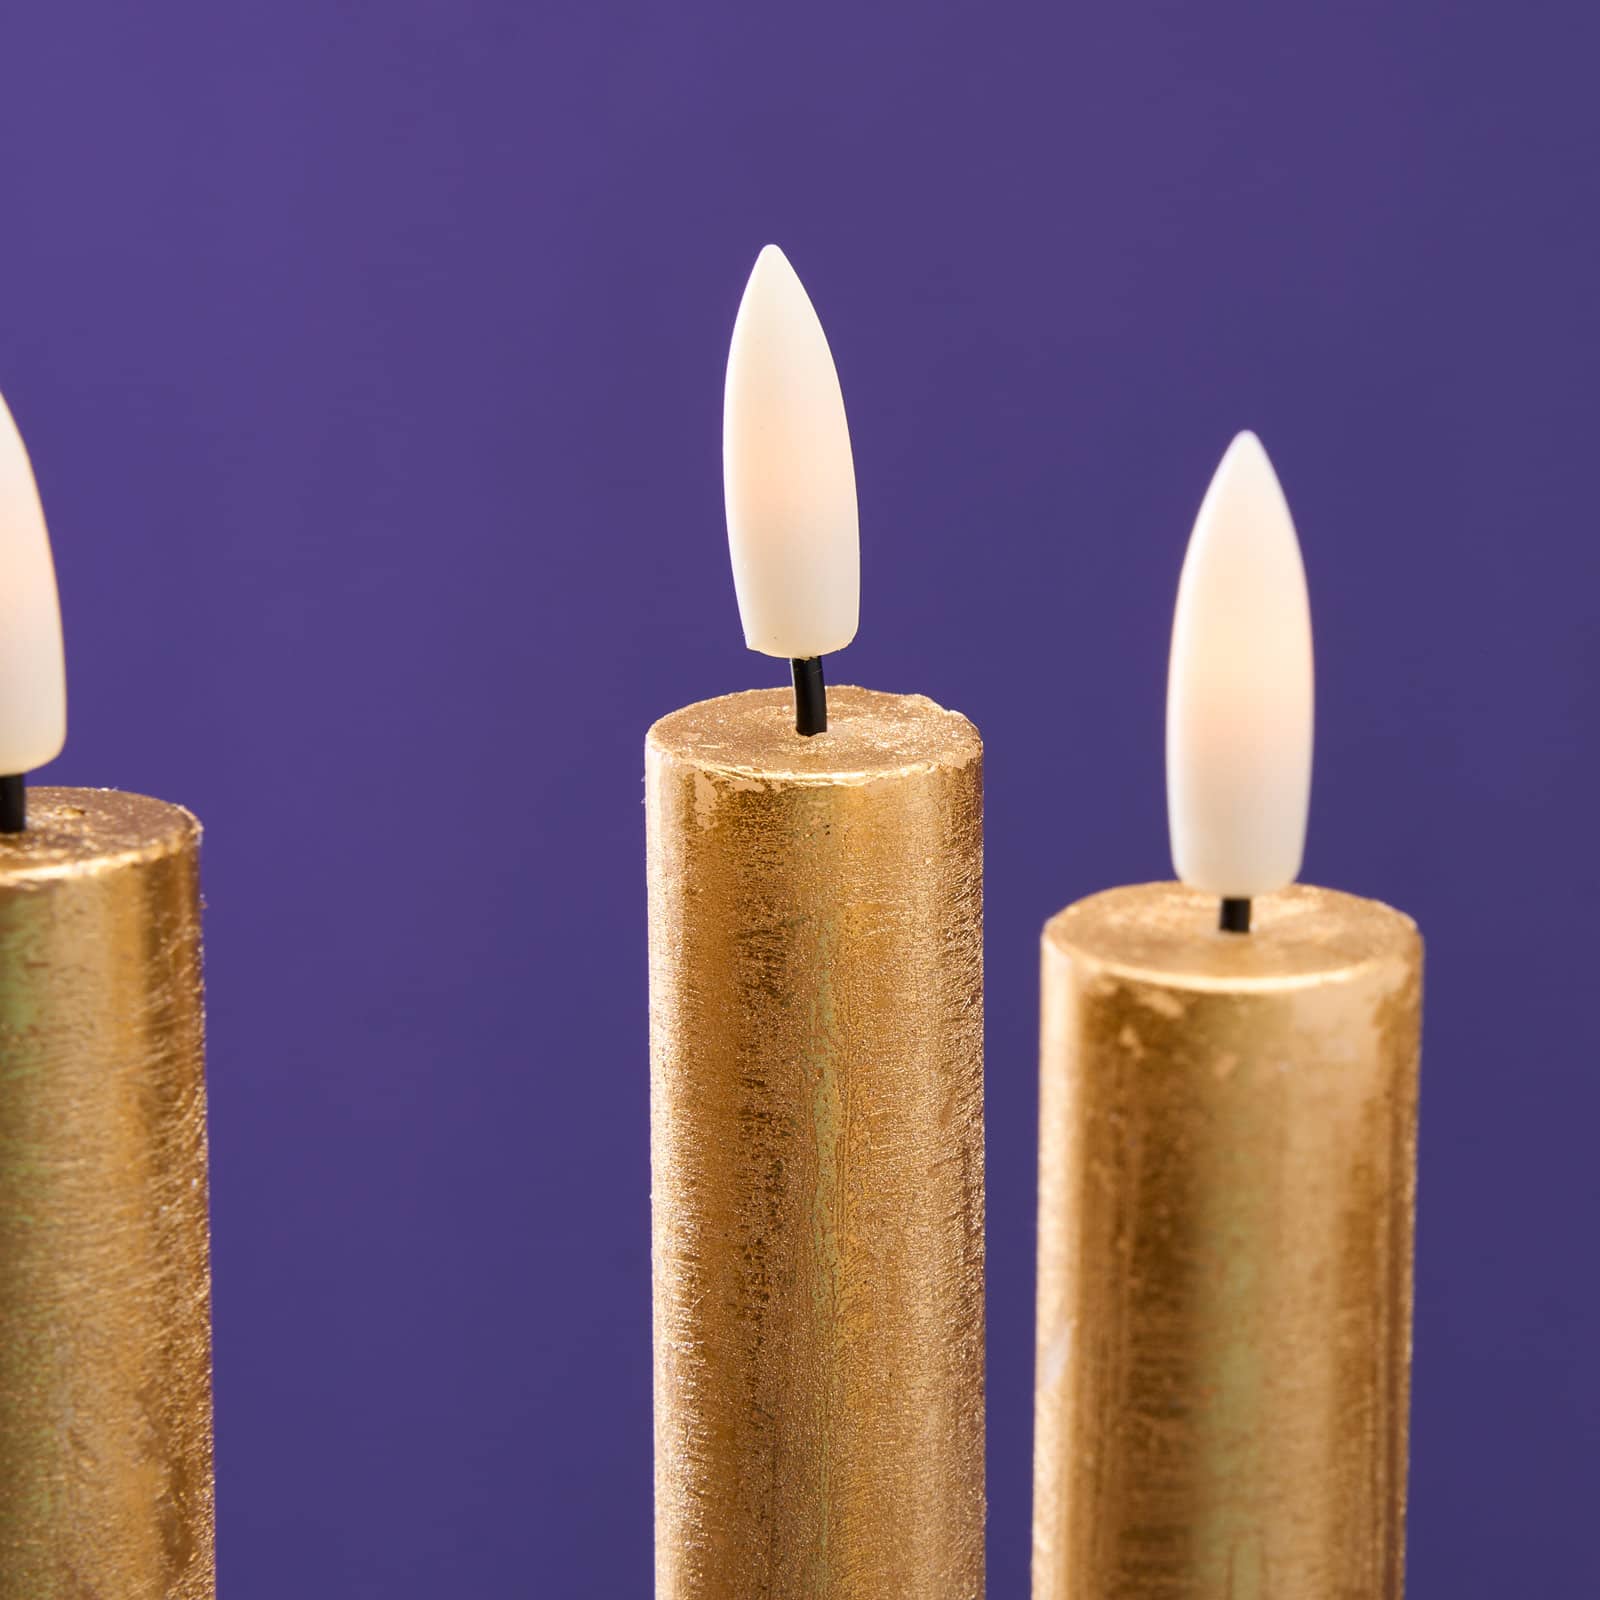 Quirky & unusual LED candles online | WERNS